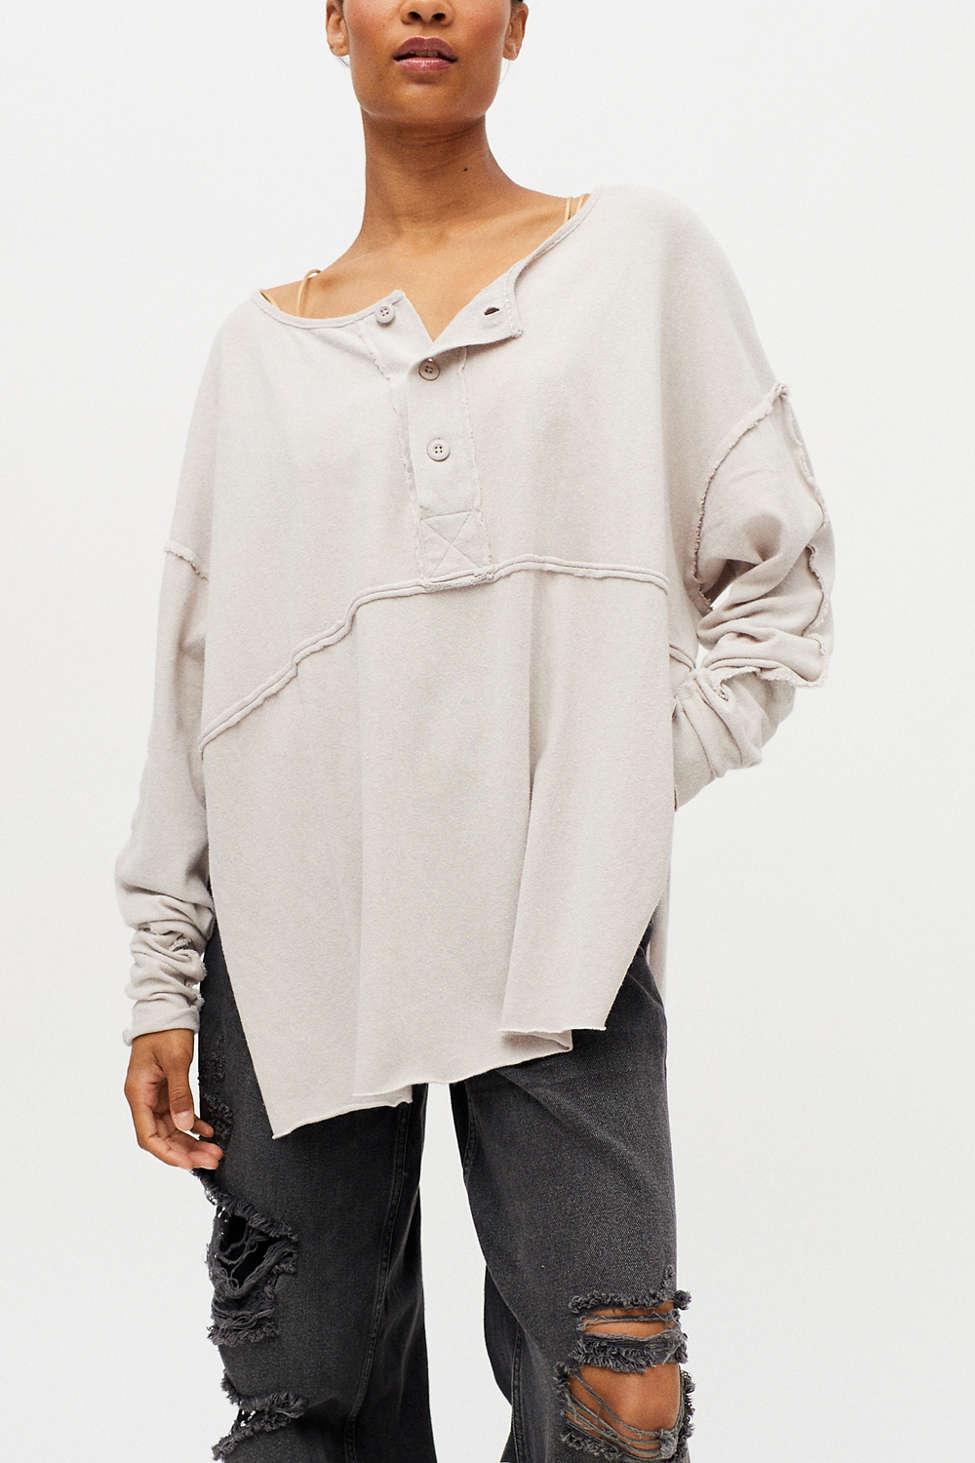 Urban Outfitters Uo Freddie Henley Tunic Top in Gray | Lyst